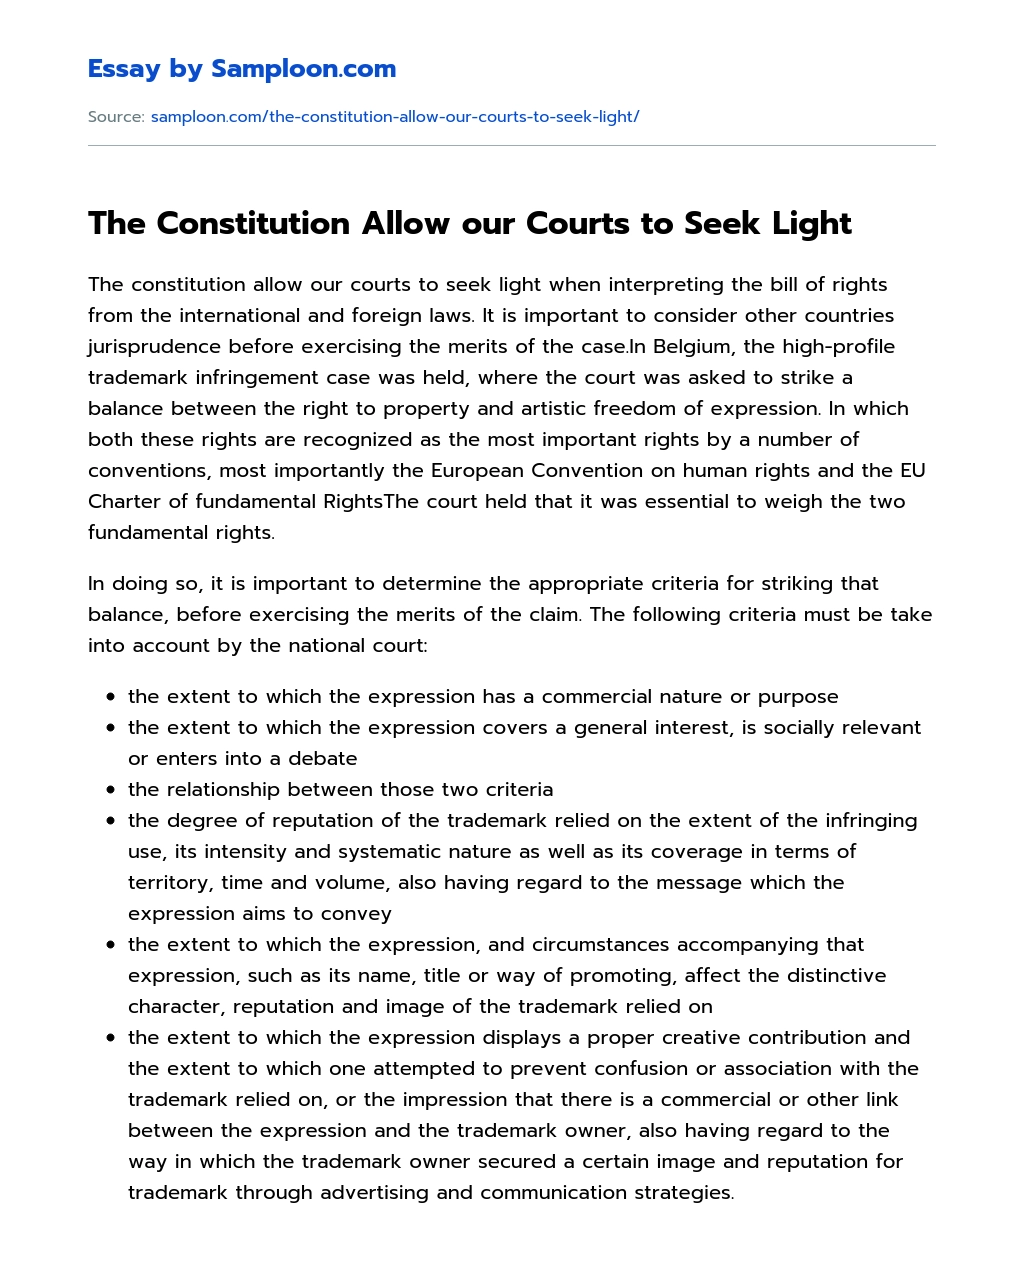 The Constitution Allow our Courts to Seek Light essay